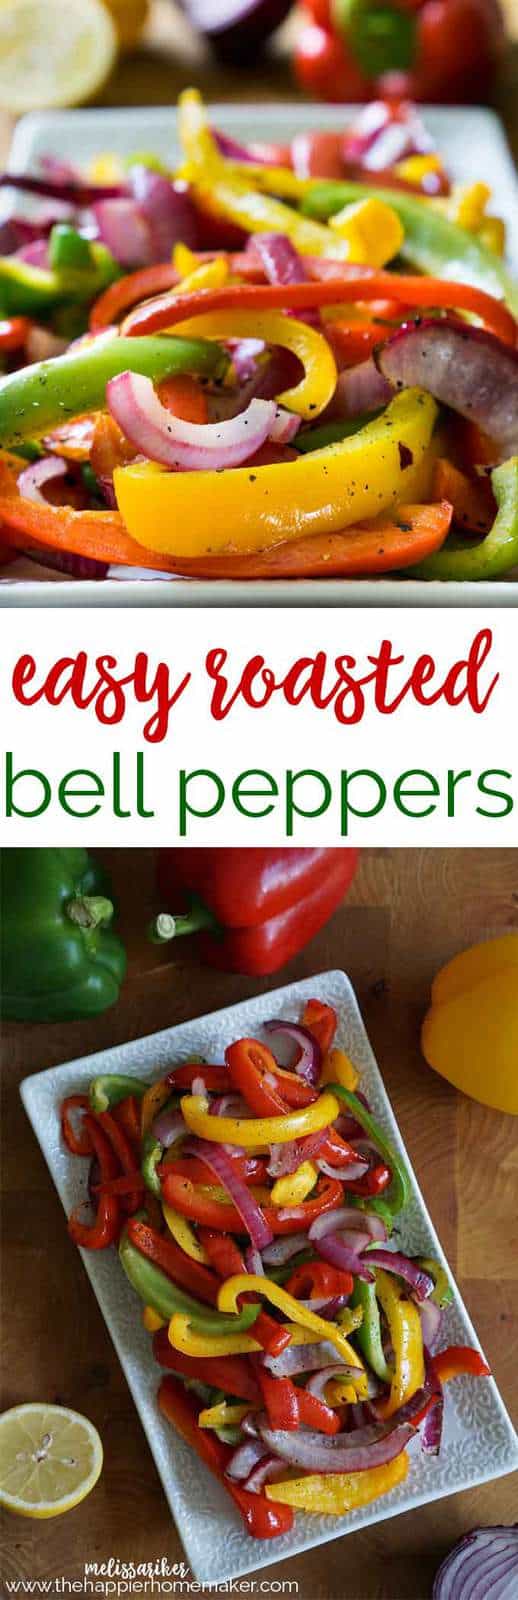 Roasted Bell Peppers Recipe | Easy Roasted Peppers in Only 20 Minutes